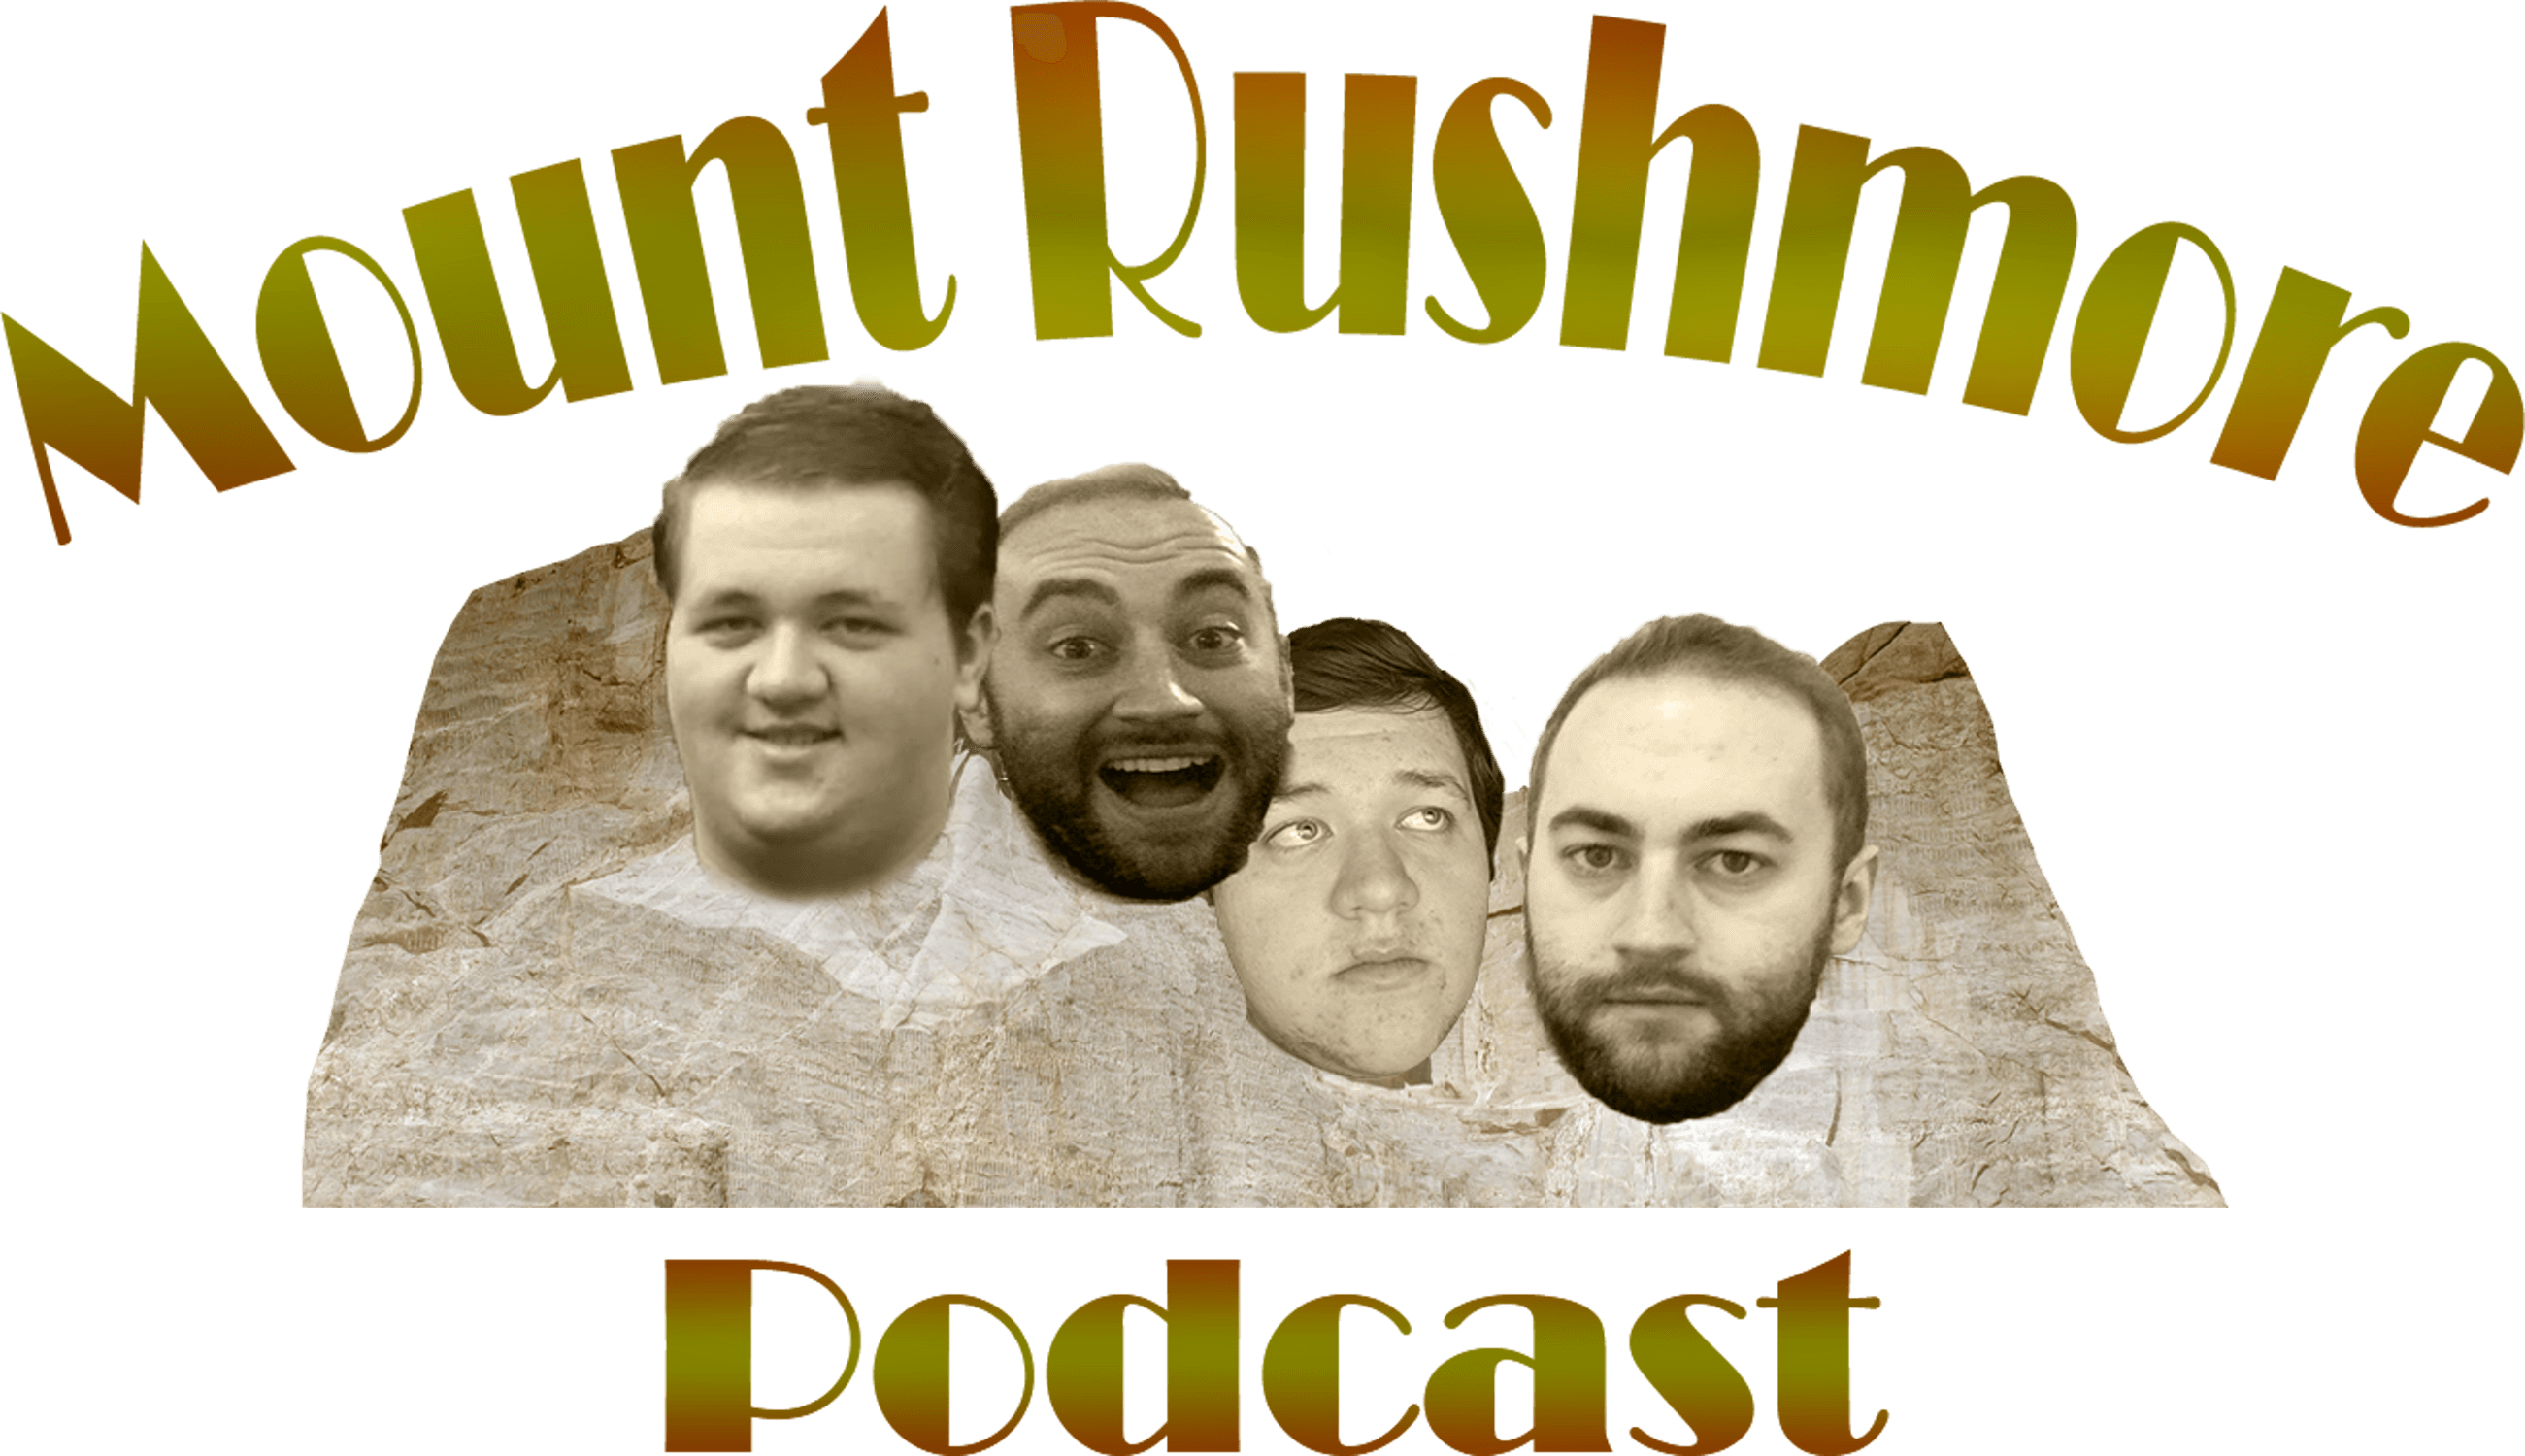 The Mount Rushmore Podcast